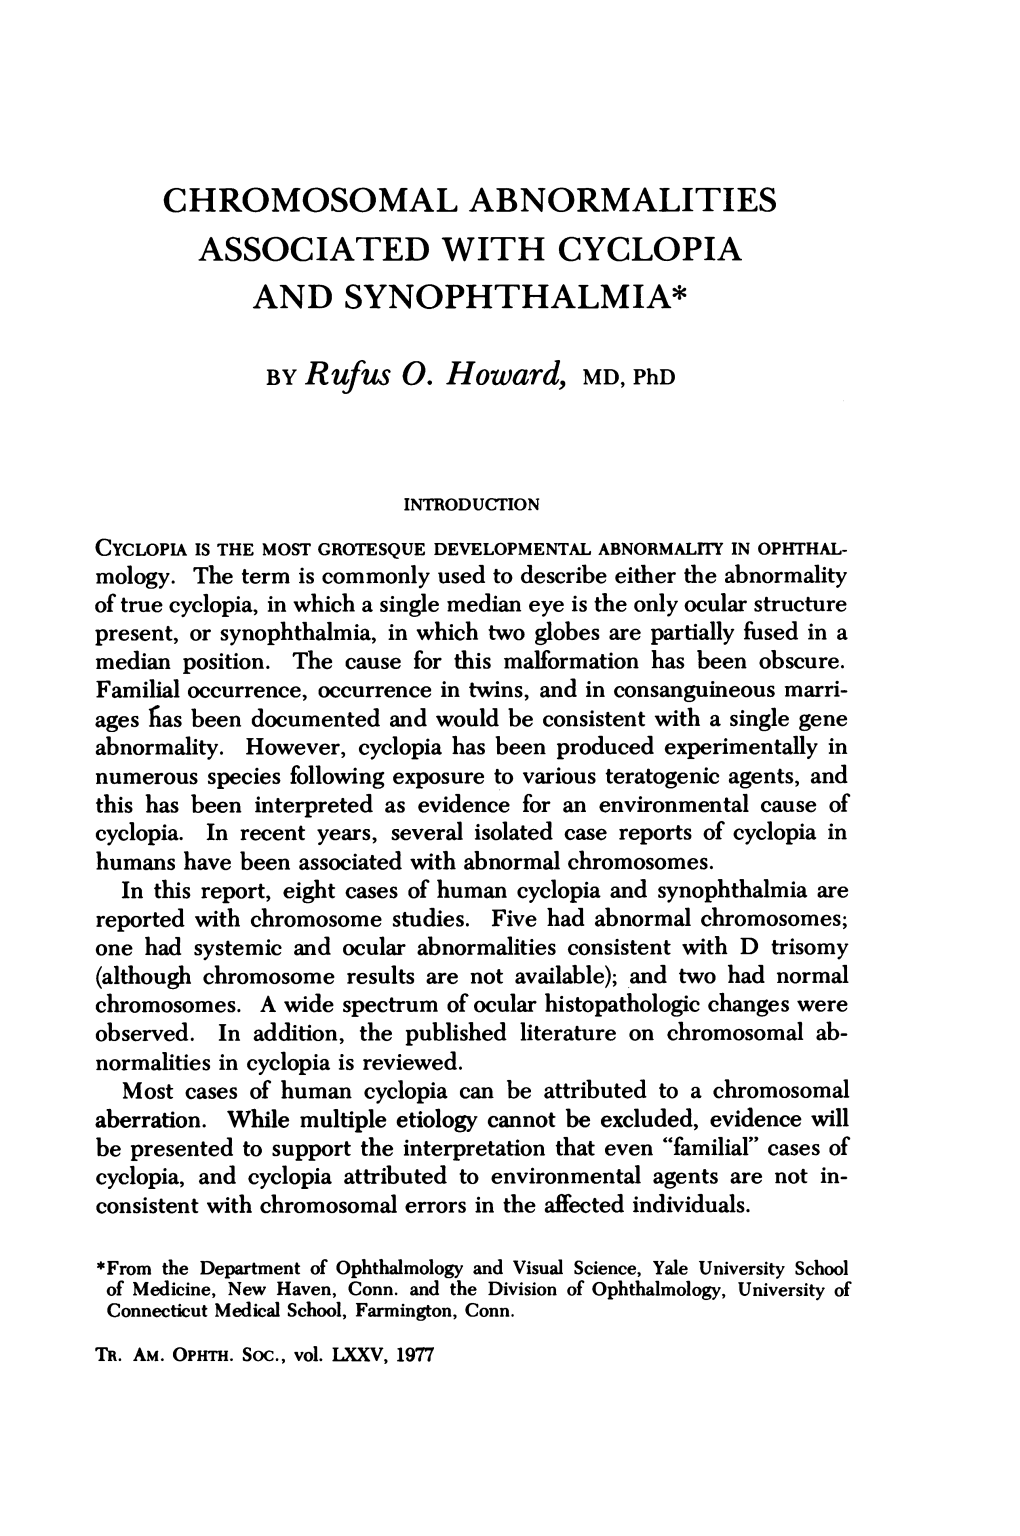 CHROMOSOMAL ABNORMALITIES ASSOCIATED with CYCLOPIA and SYNOPHTHALMIA* by Rufus 0